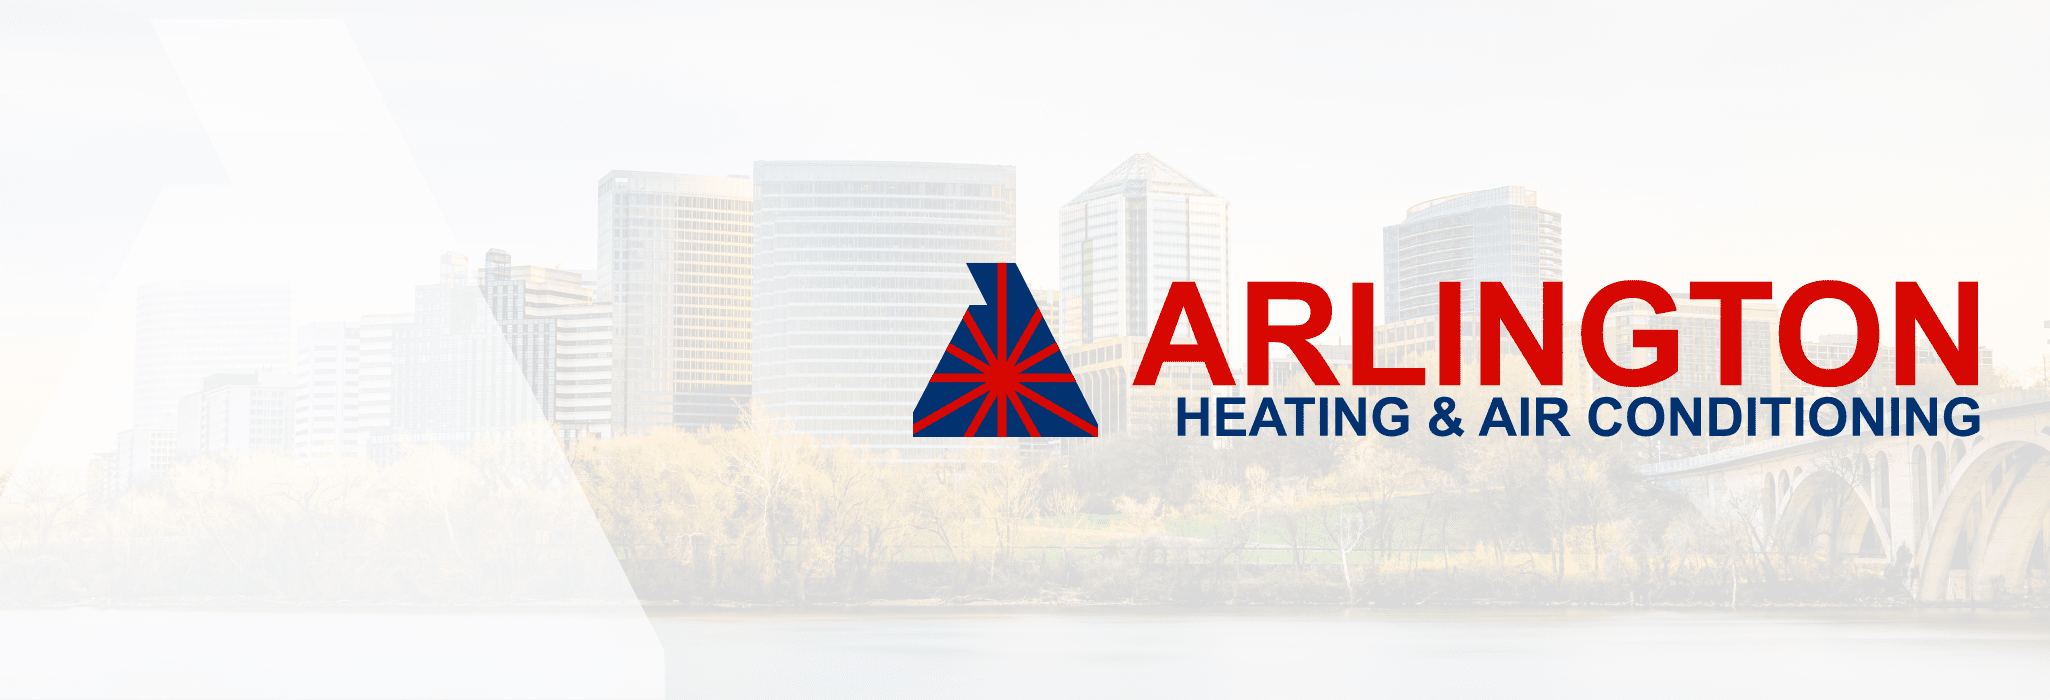 About Arlington Heating & A/C